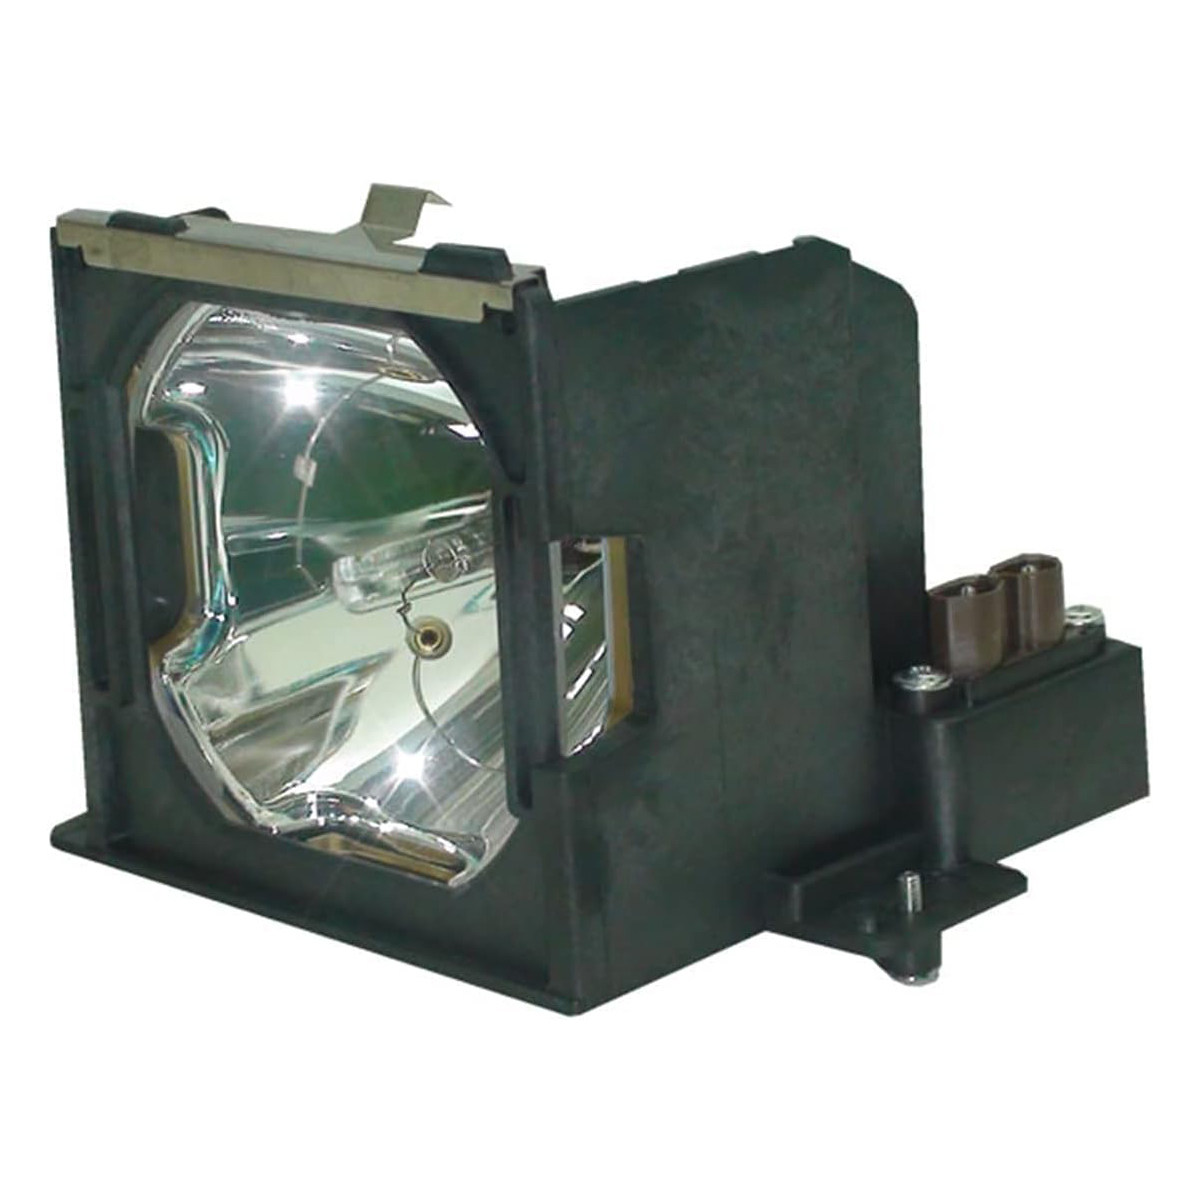 Replacement Projector lamp 03-000667-01P For CHRISTIE MONTAGE LX33/VIVID LX41